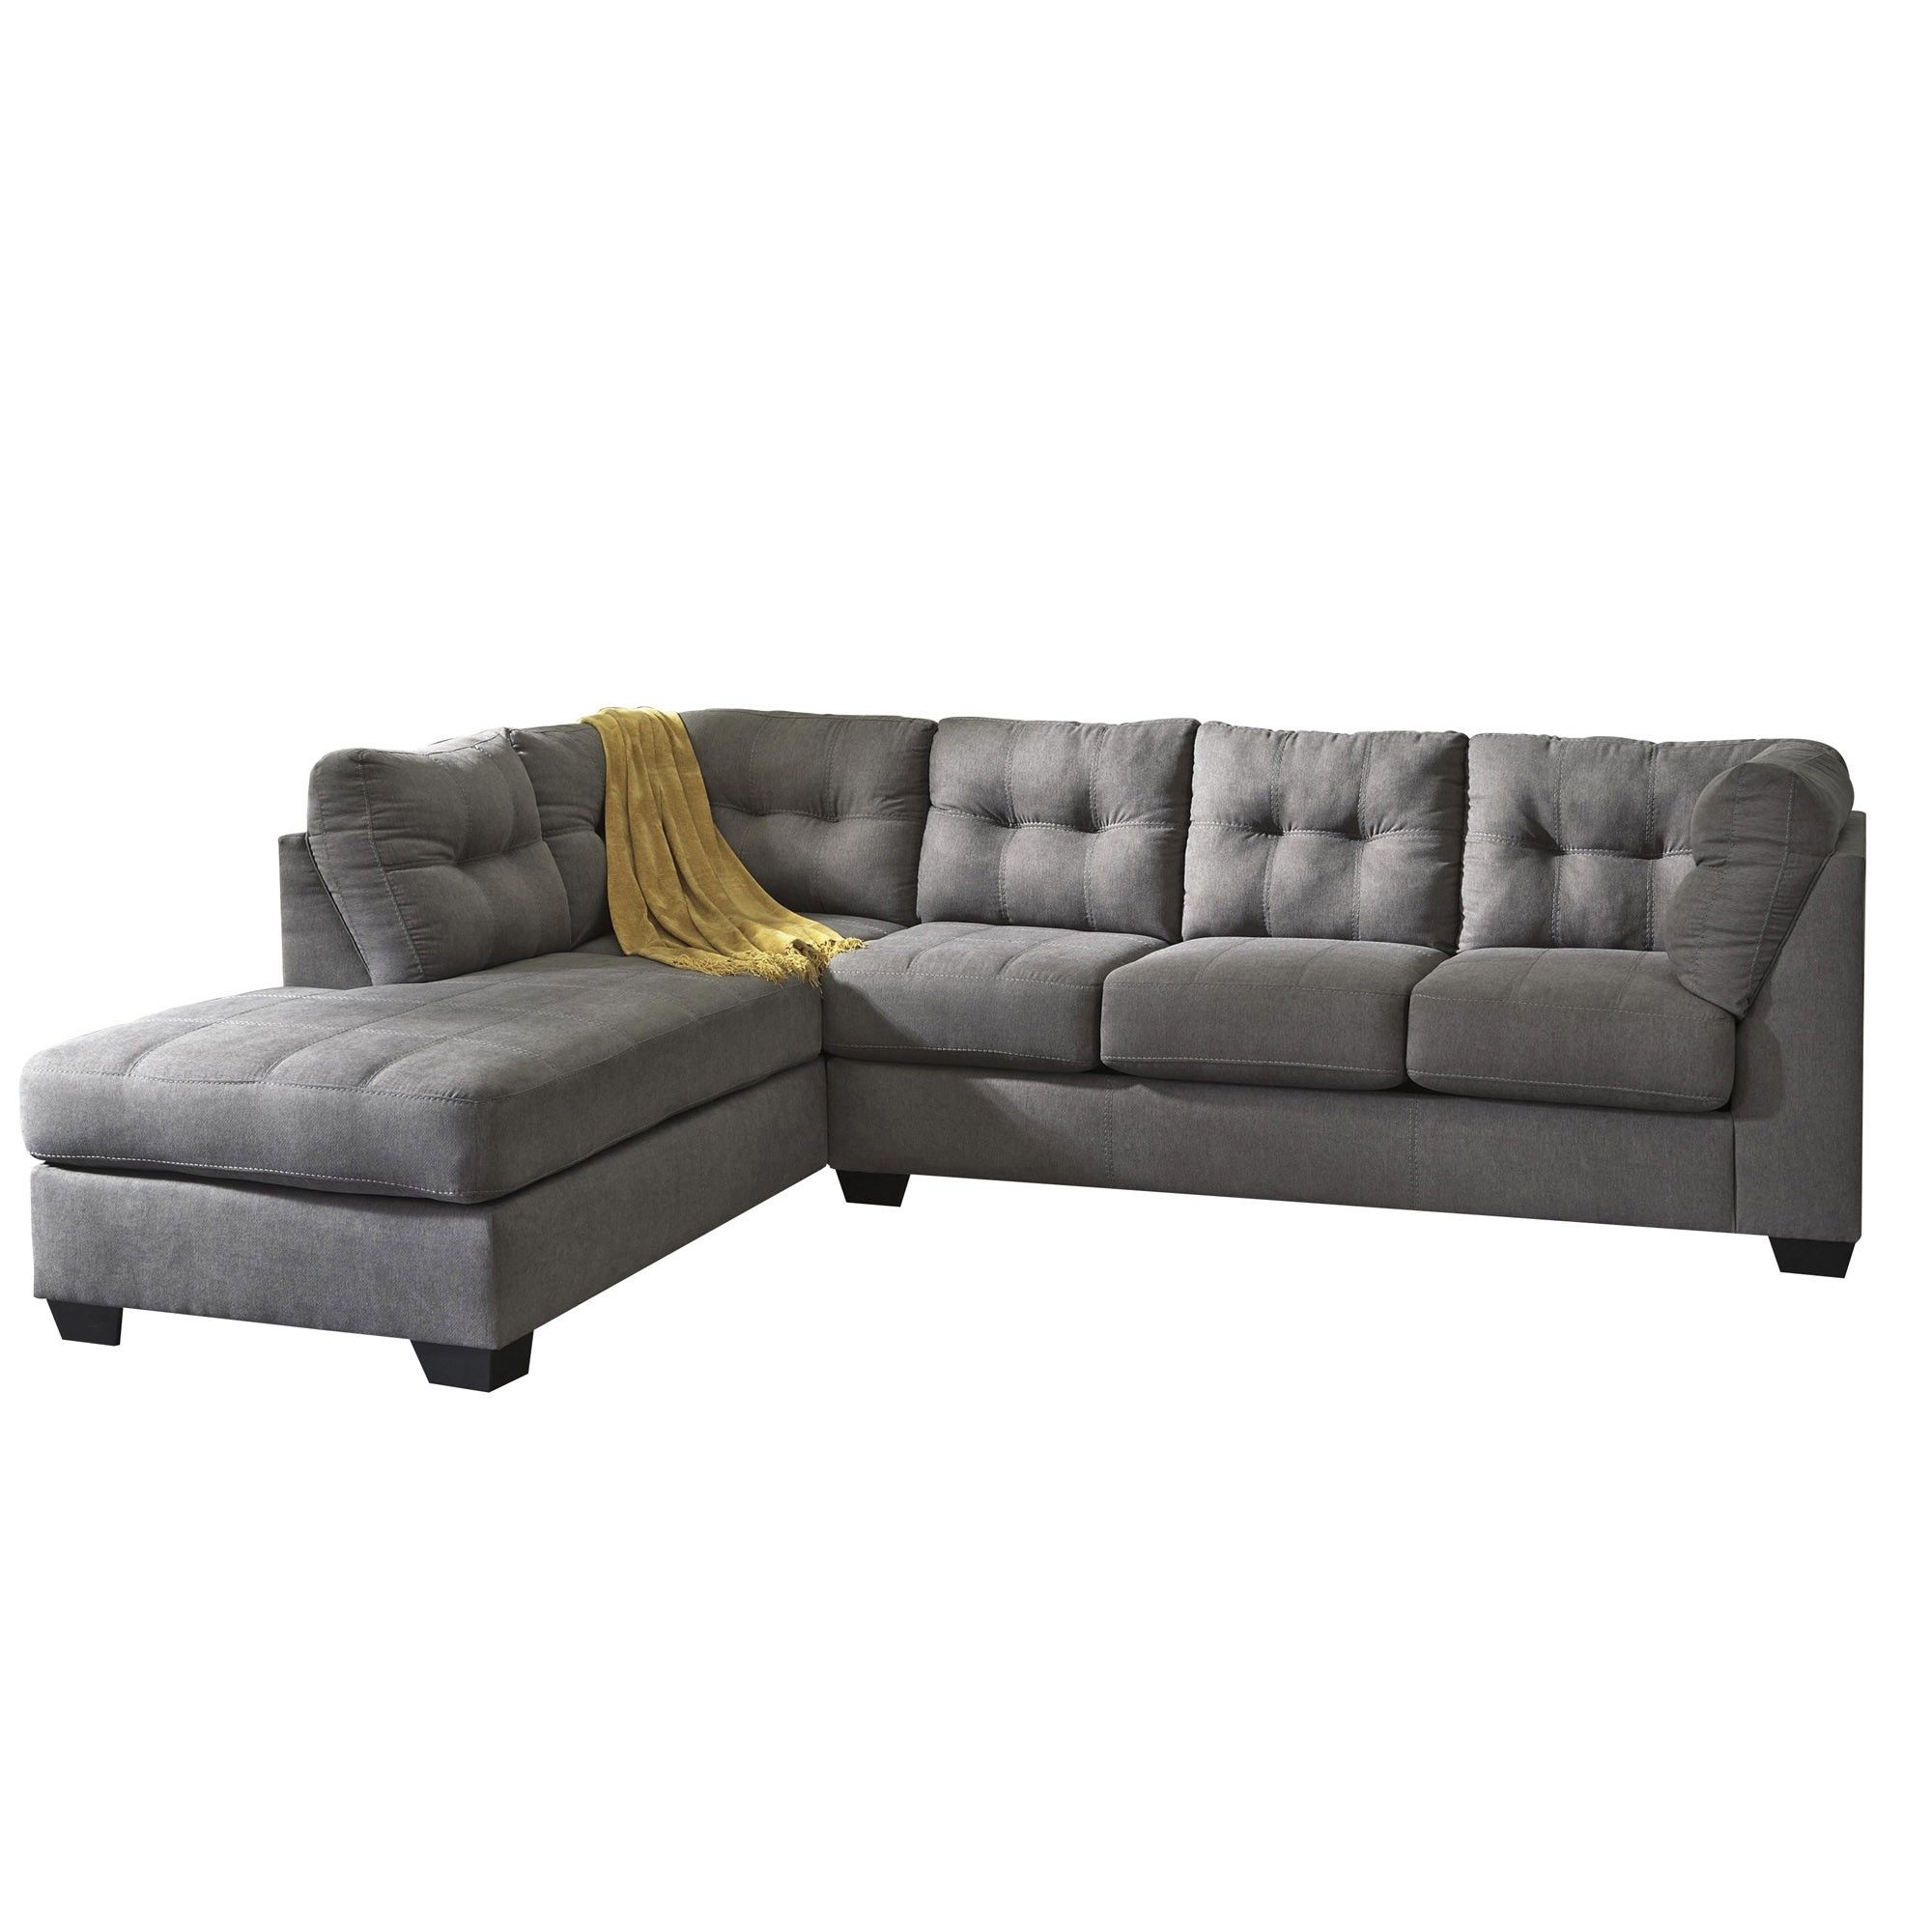 Maier 2 Piece Sectional | Tepperman's Throughout Teppermans Sectional Sofas (View 6 of 10)